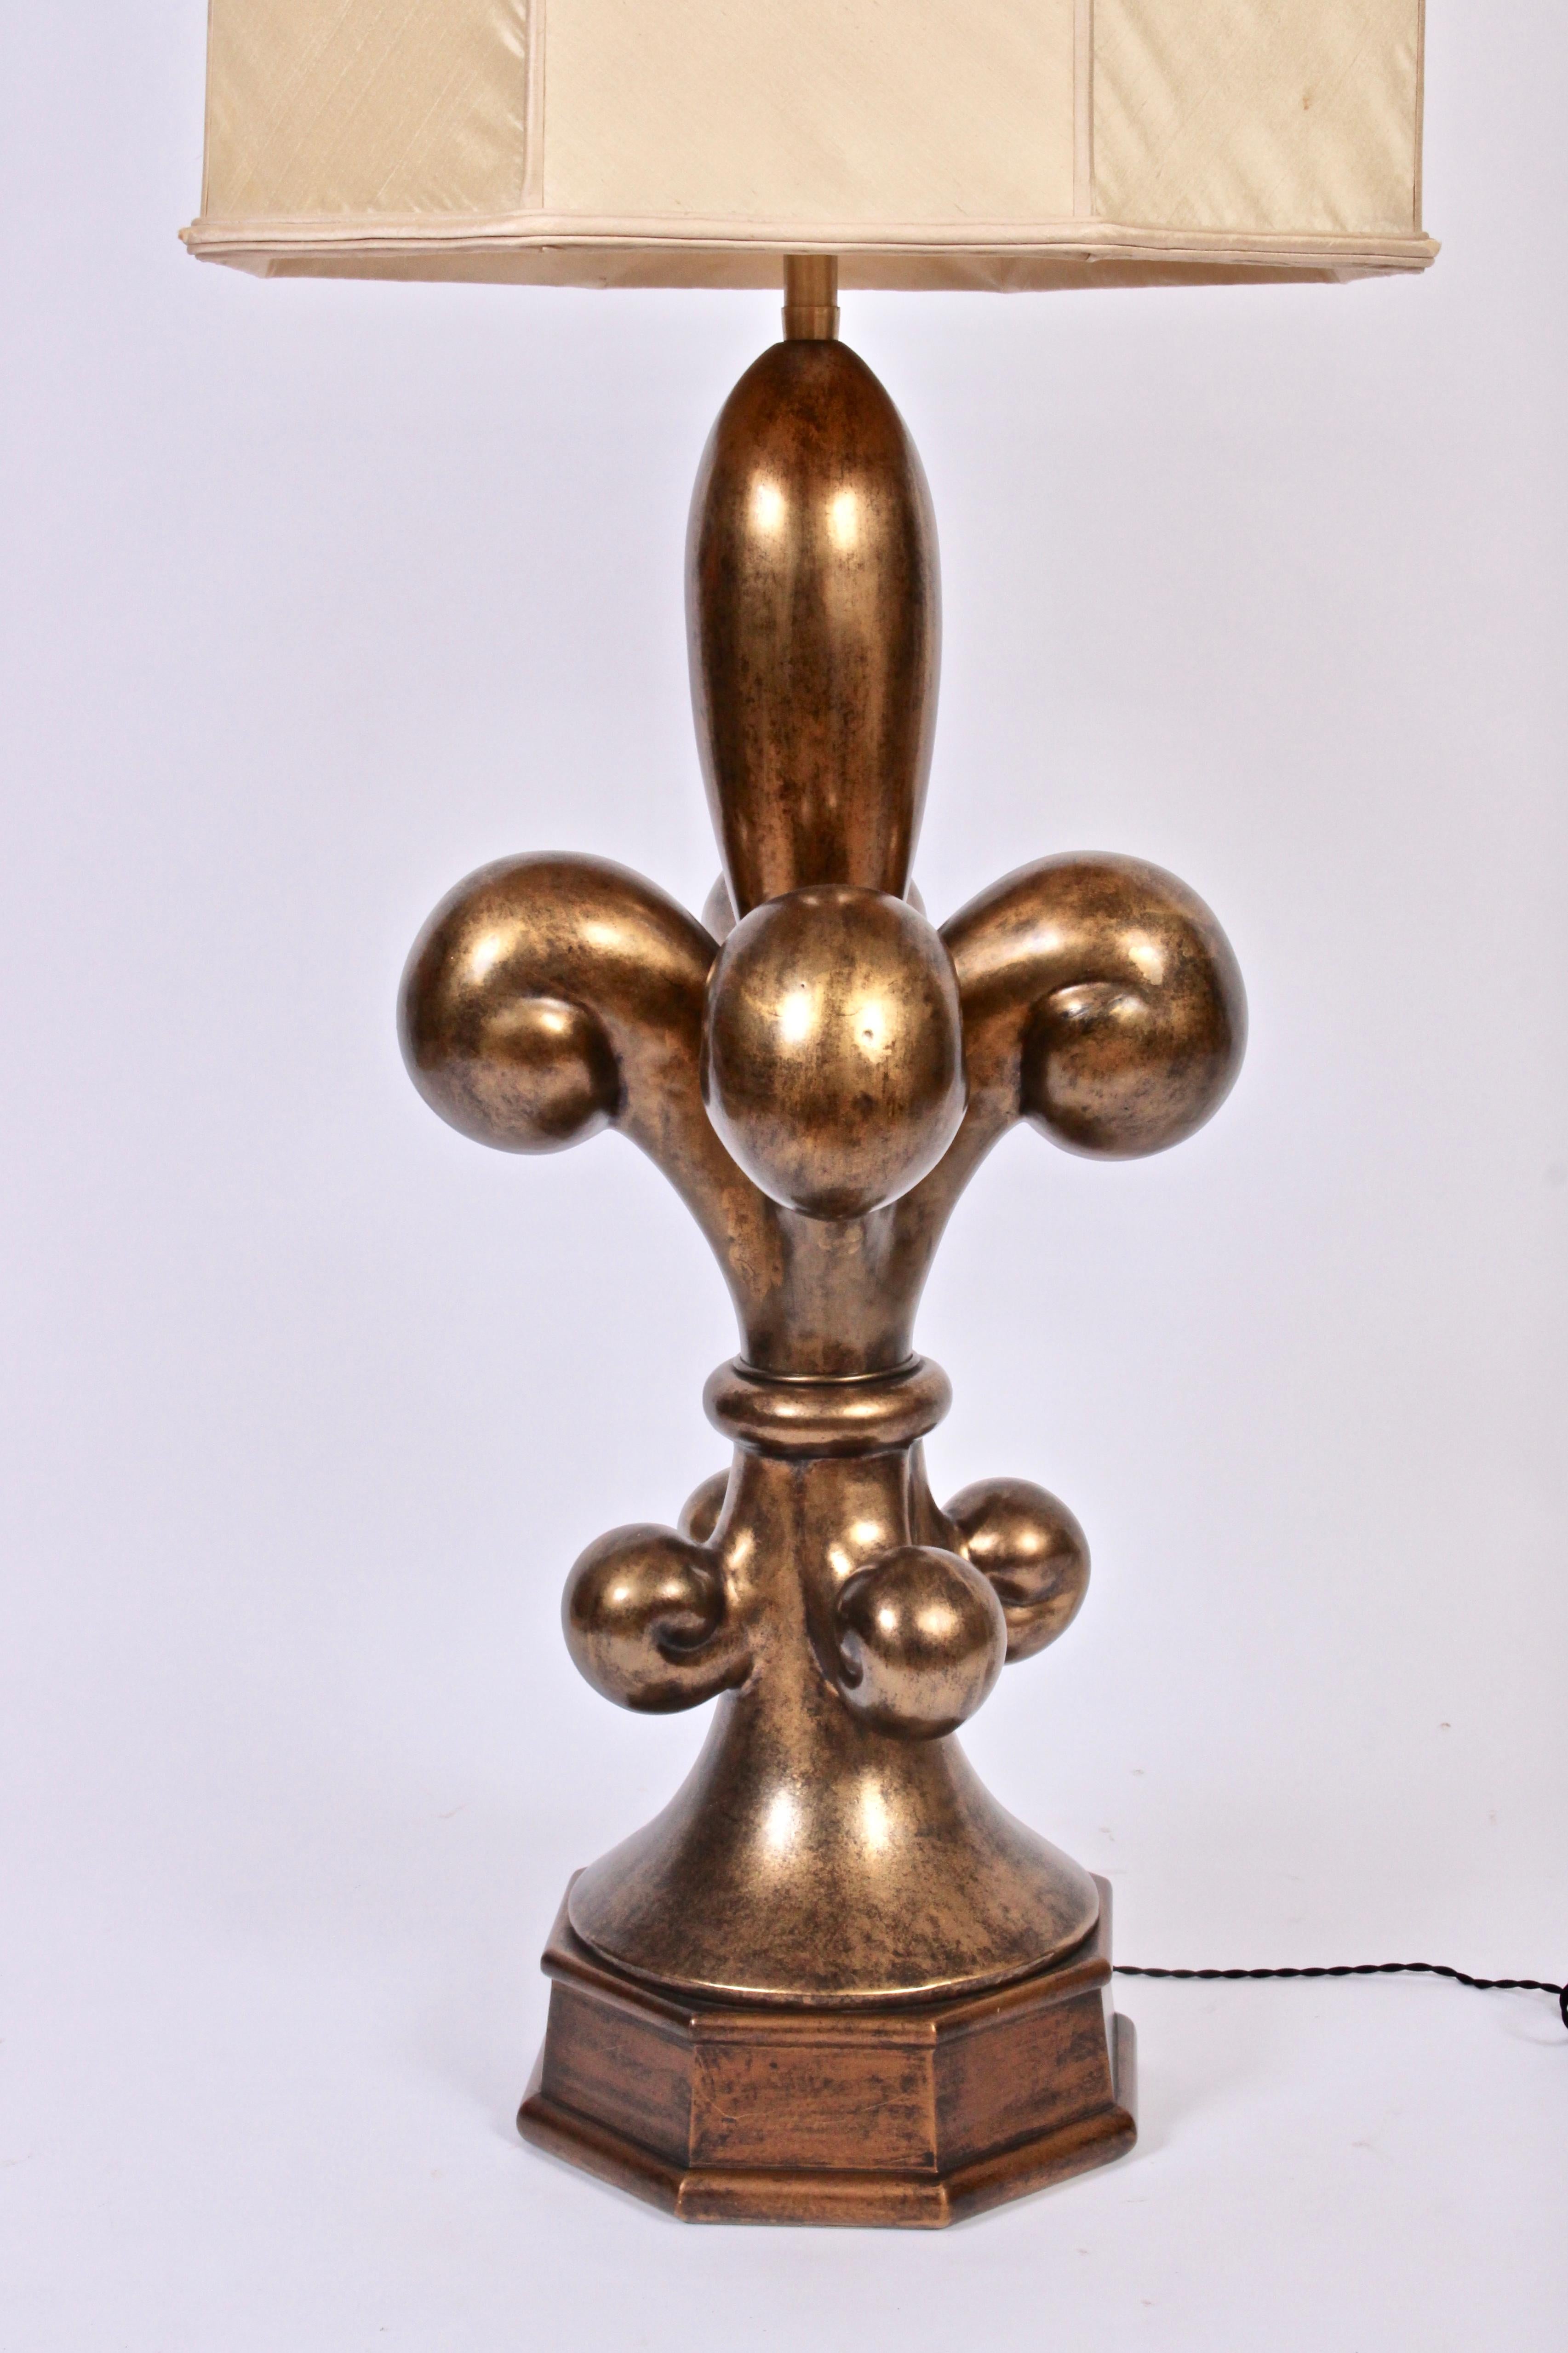 Substantial Six Foot Marbro Lighting Company Brass Table Lamp with White Milk Glass Shade. Statuesque sculptural fleur de lis form with Antique Brass finish. Stands approximately 6 feet tall. Includes glass liner shade. 52.5H to top of socket.